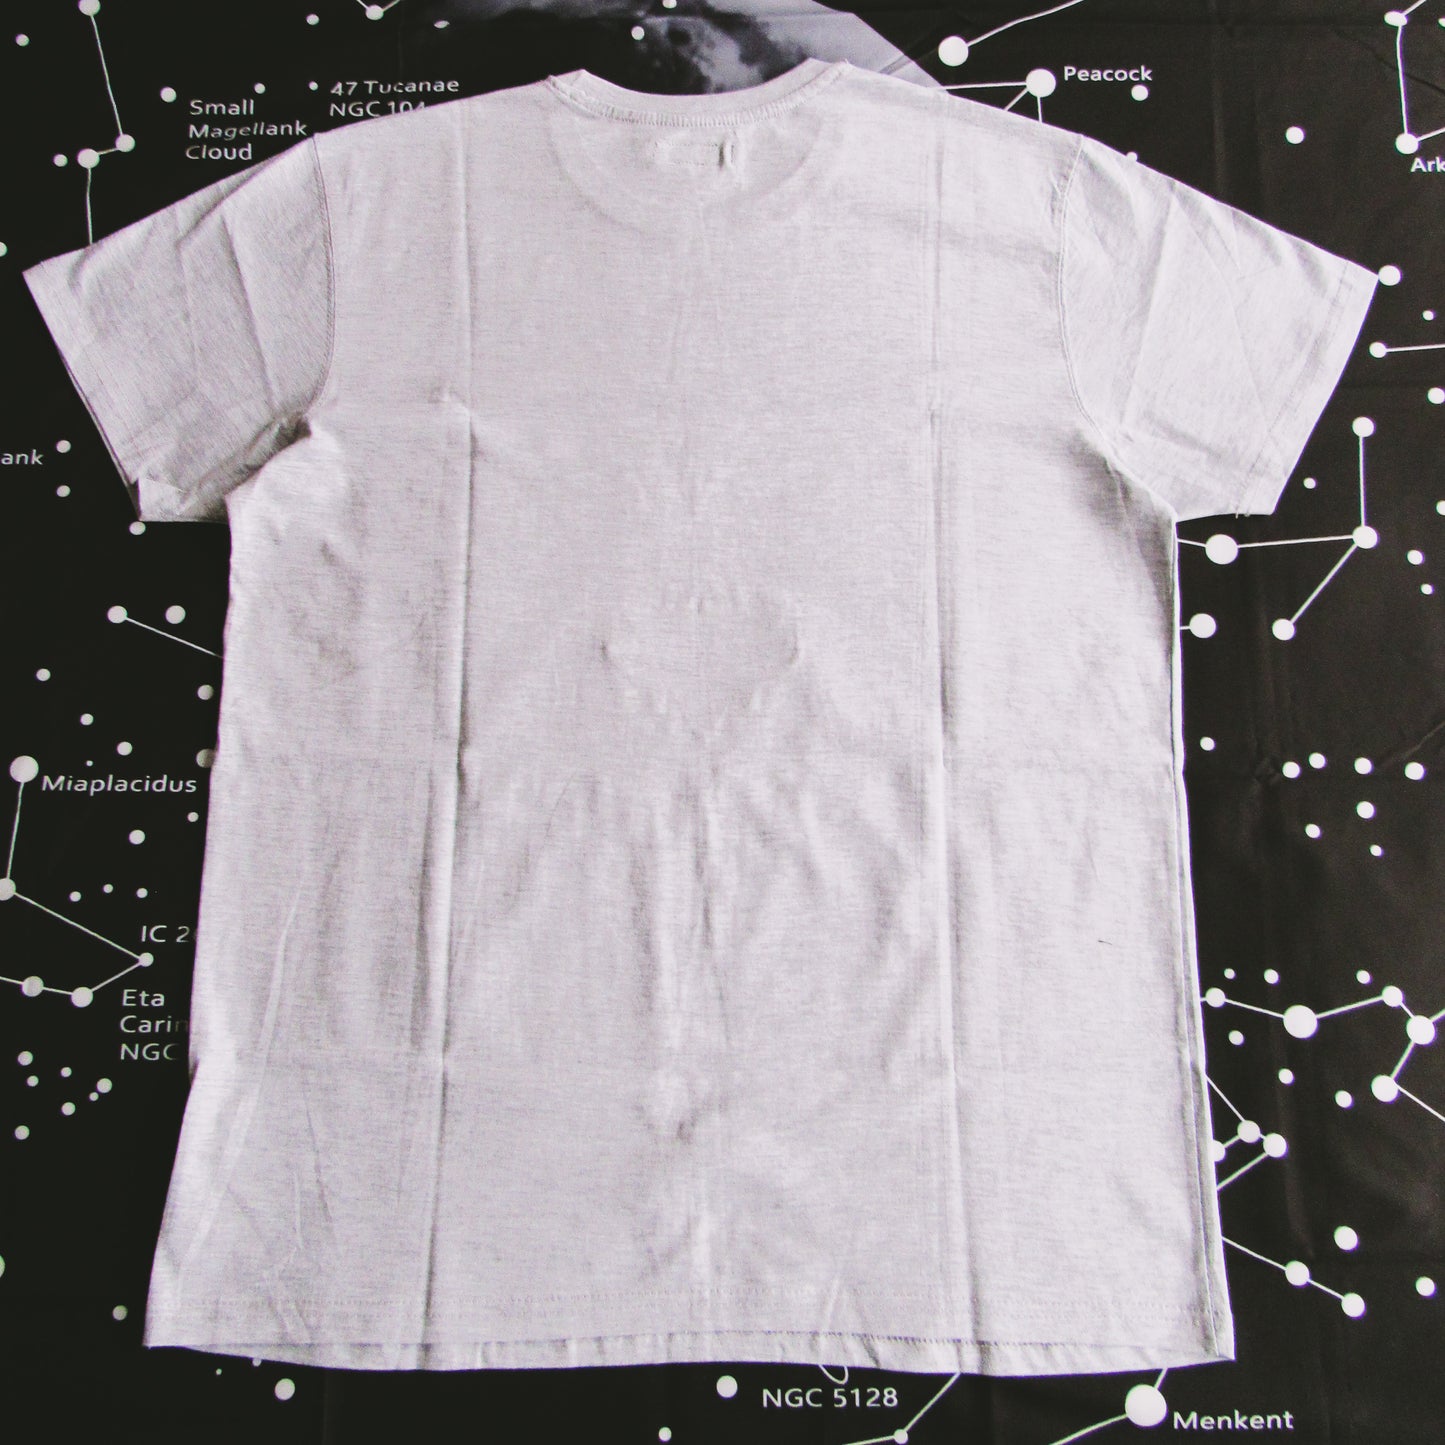 Plain Grey T Shirt With A Sewed On Patch